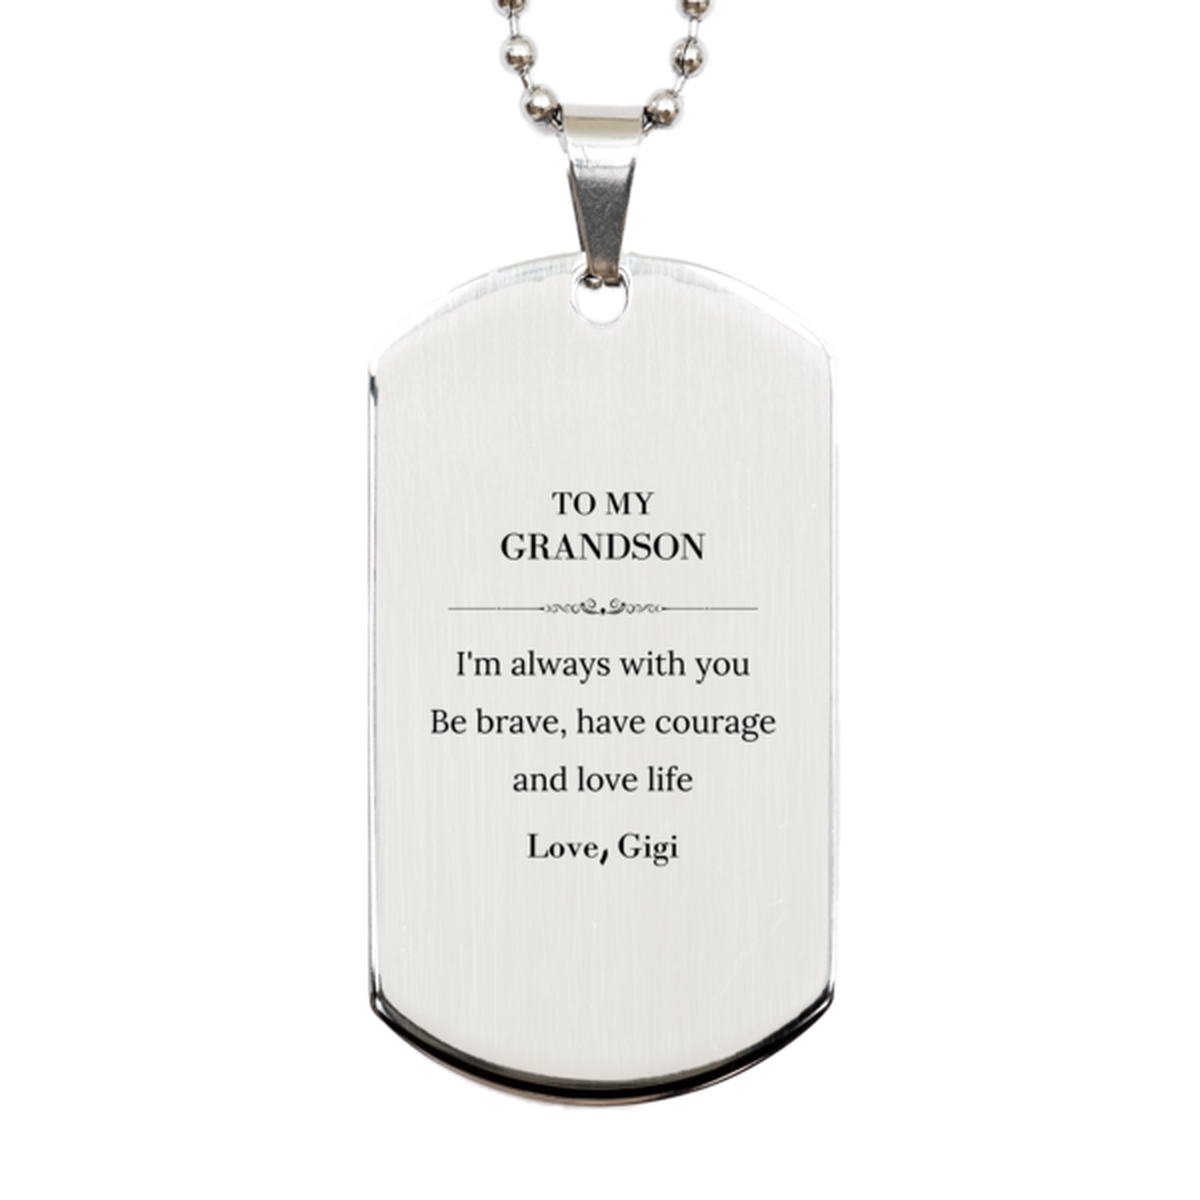 To My Grandson Gifts from Gigi, Unique Silver Dog Tag Inspirational Christmas Birthday Graduation Gifts for Grandson I'm always with you. Be brave, have courage and love life. Love, Gigi